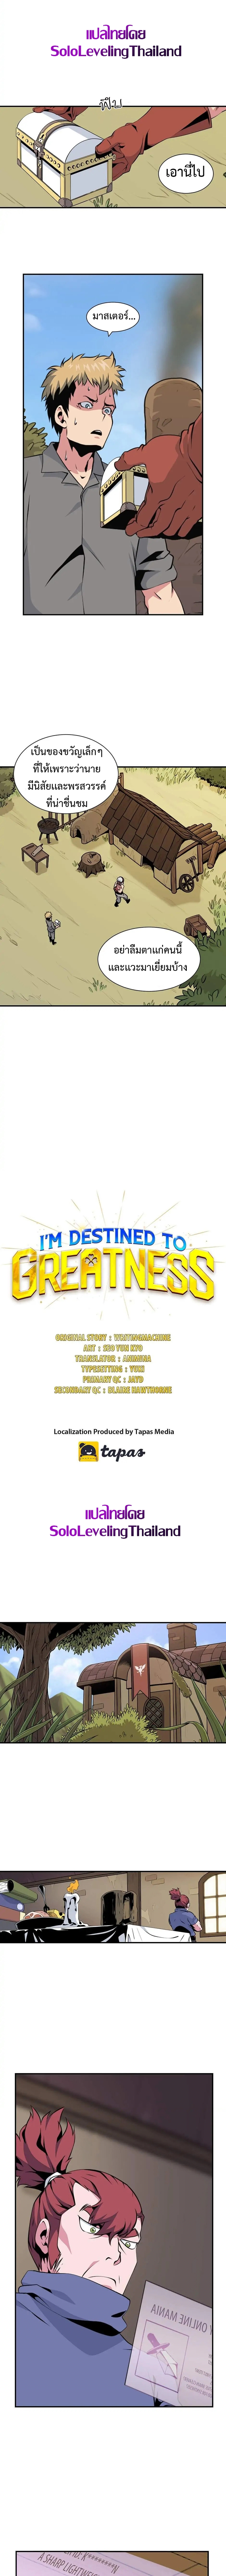 I’m Destined For Greatness 10 (2)